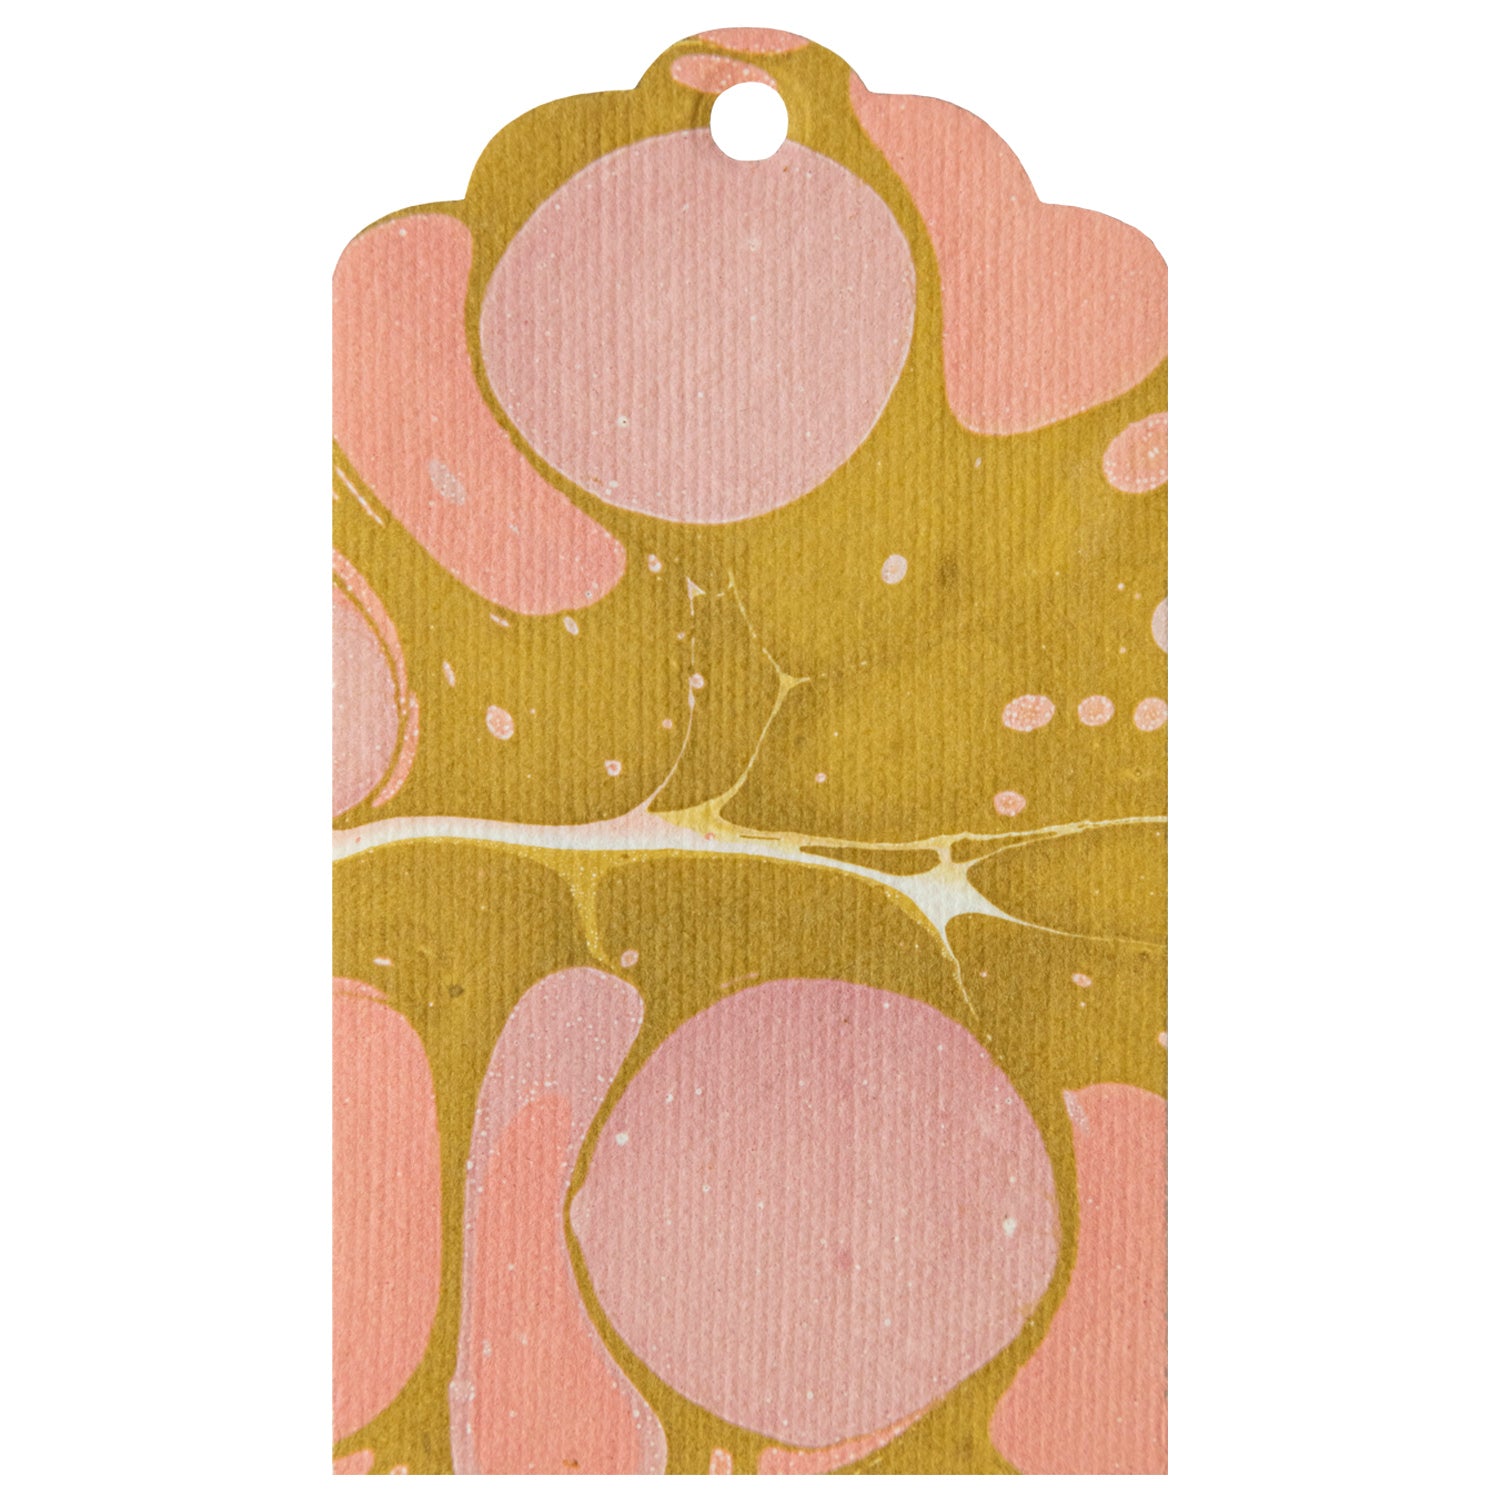 A unique Stone Marbled Gift Tag with pink and yellow marbled circles, handmade from papers by Hester &amp; Cook.